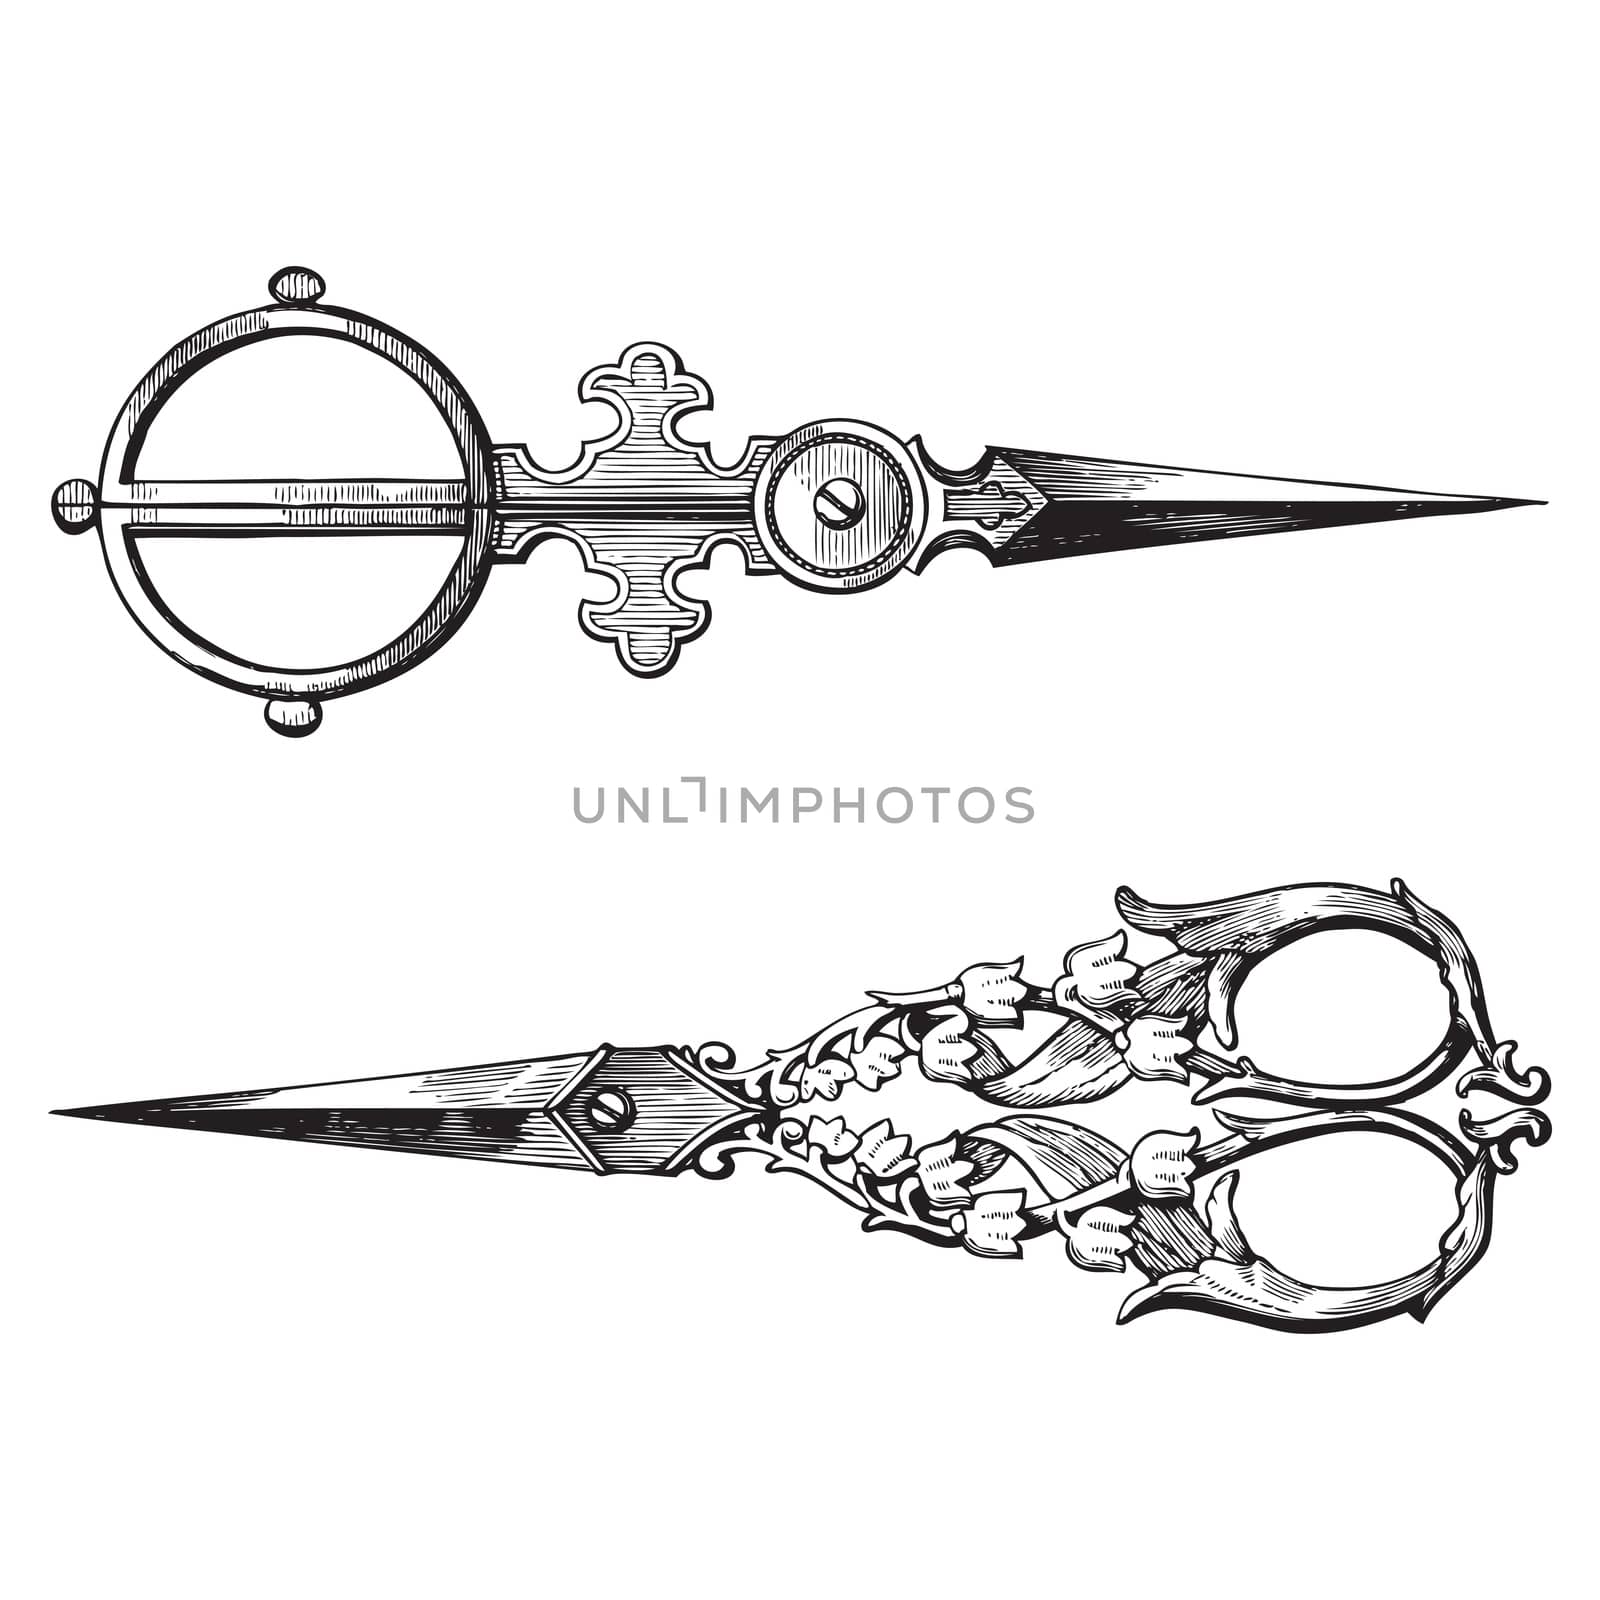 Ancient style engraving of two vintage ornate scissors